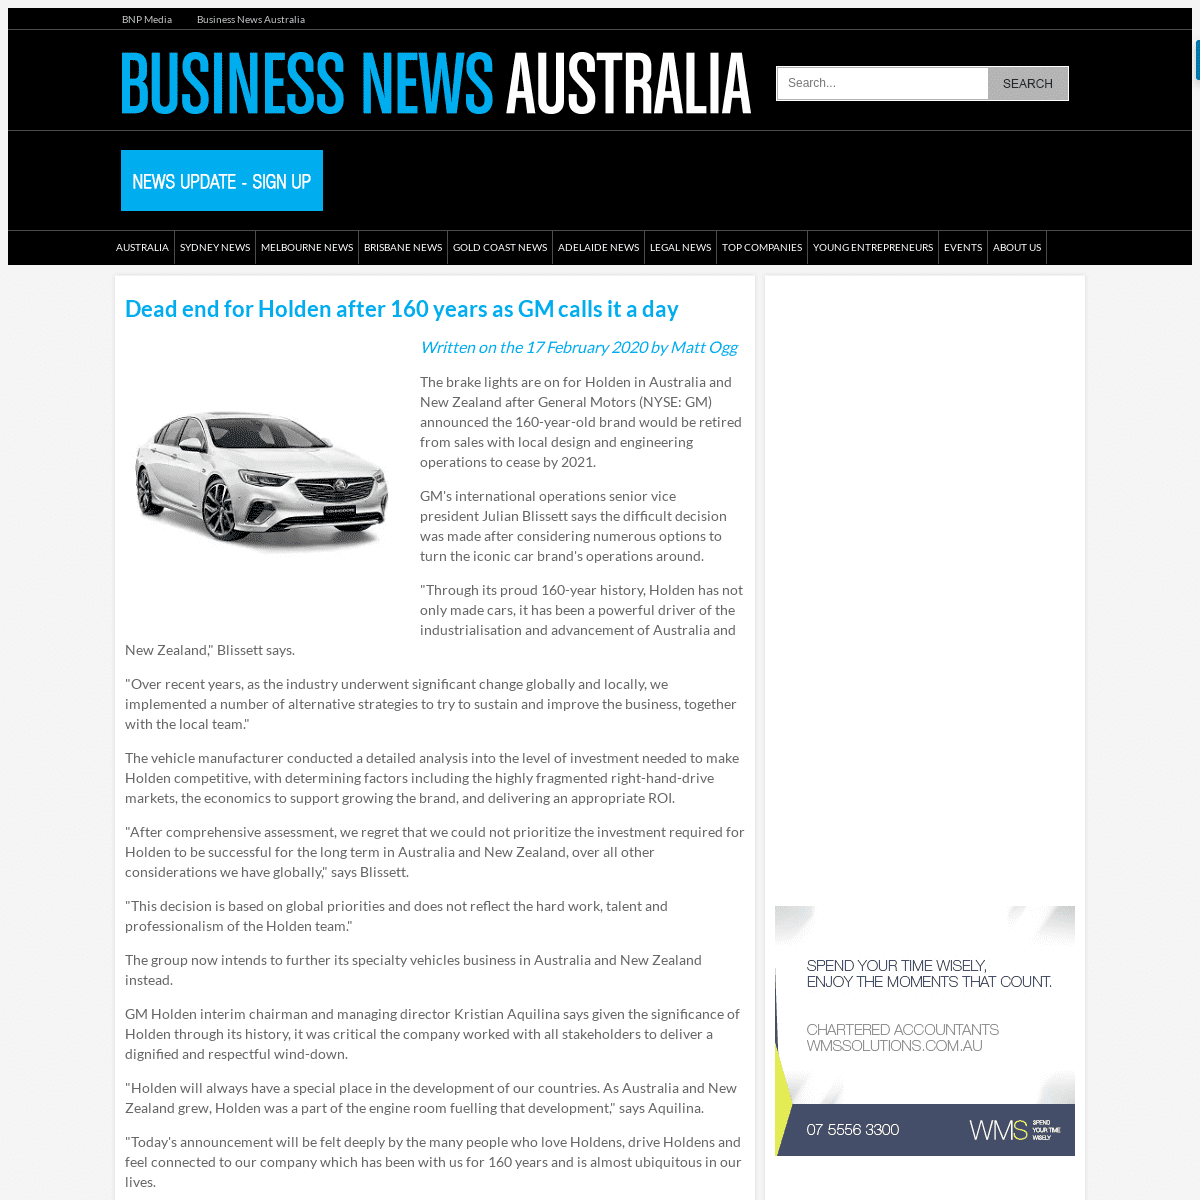 A complete backup of www.businessnewsaus.com.au/articles/dead-end-for-holden-after-160-years-as-gm-calls-it-a-day.html